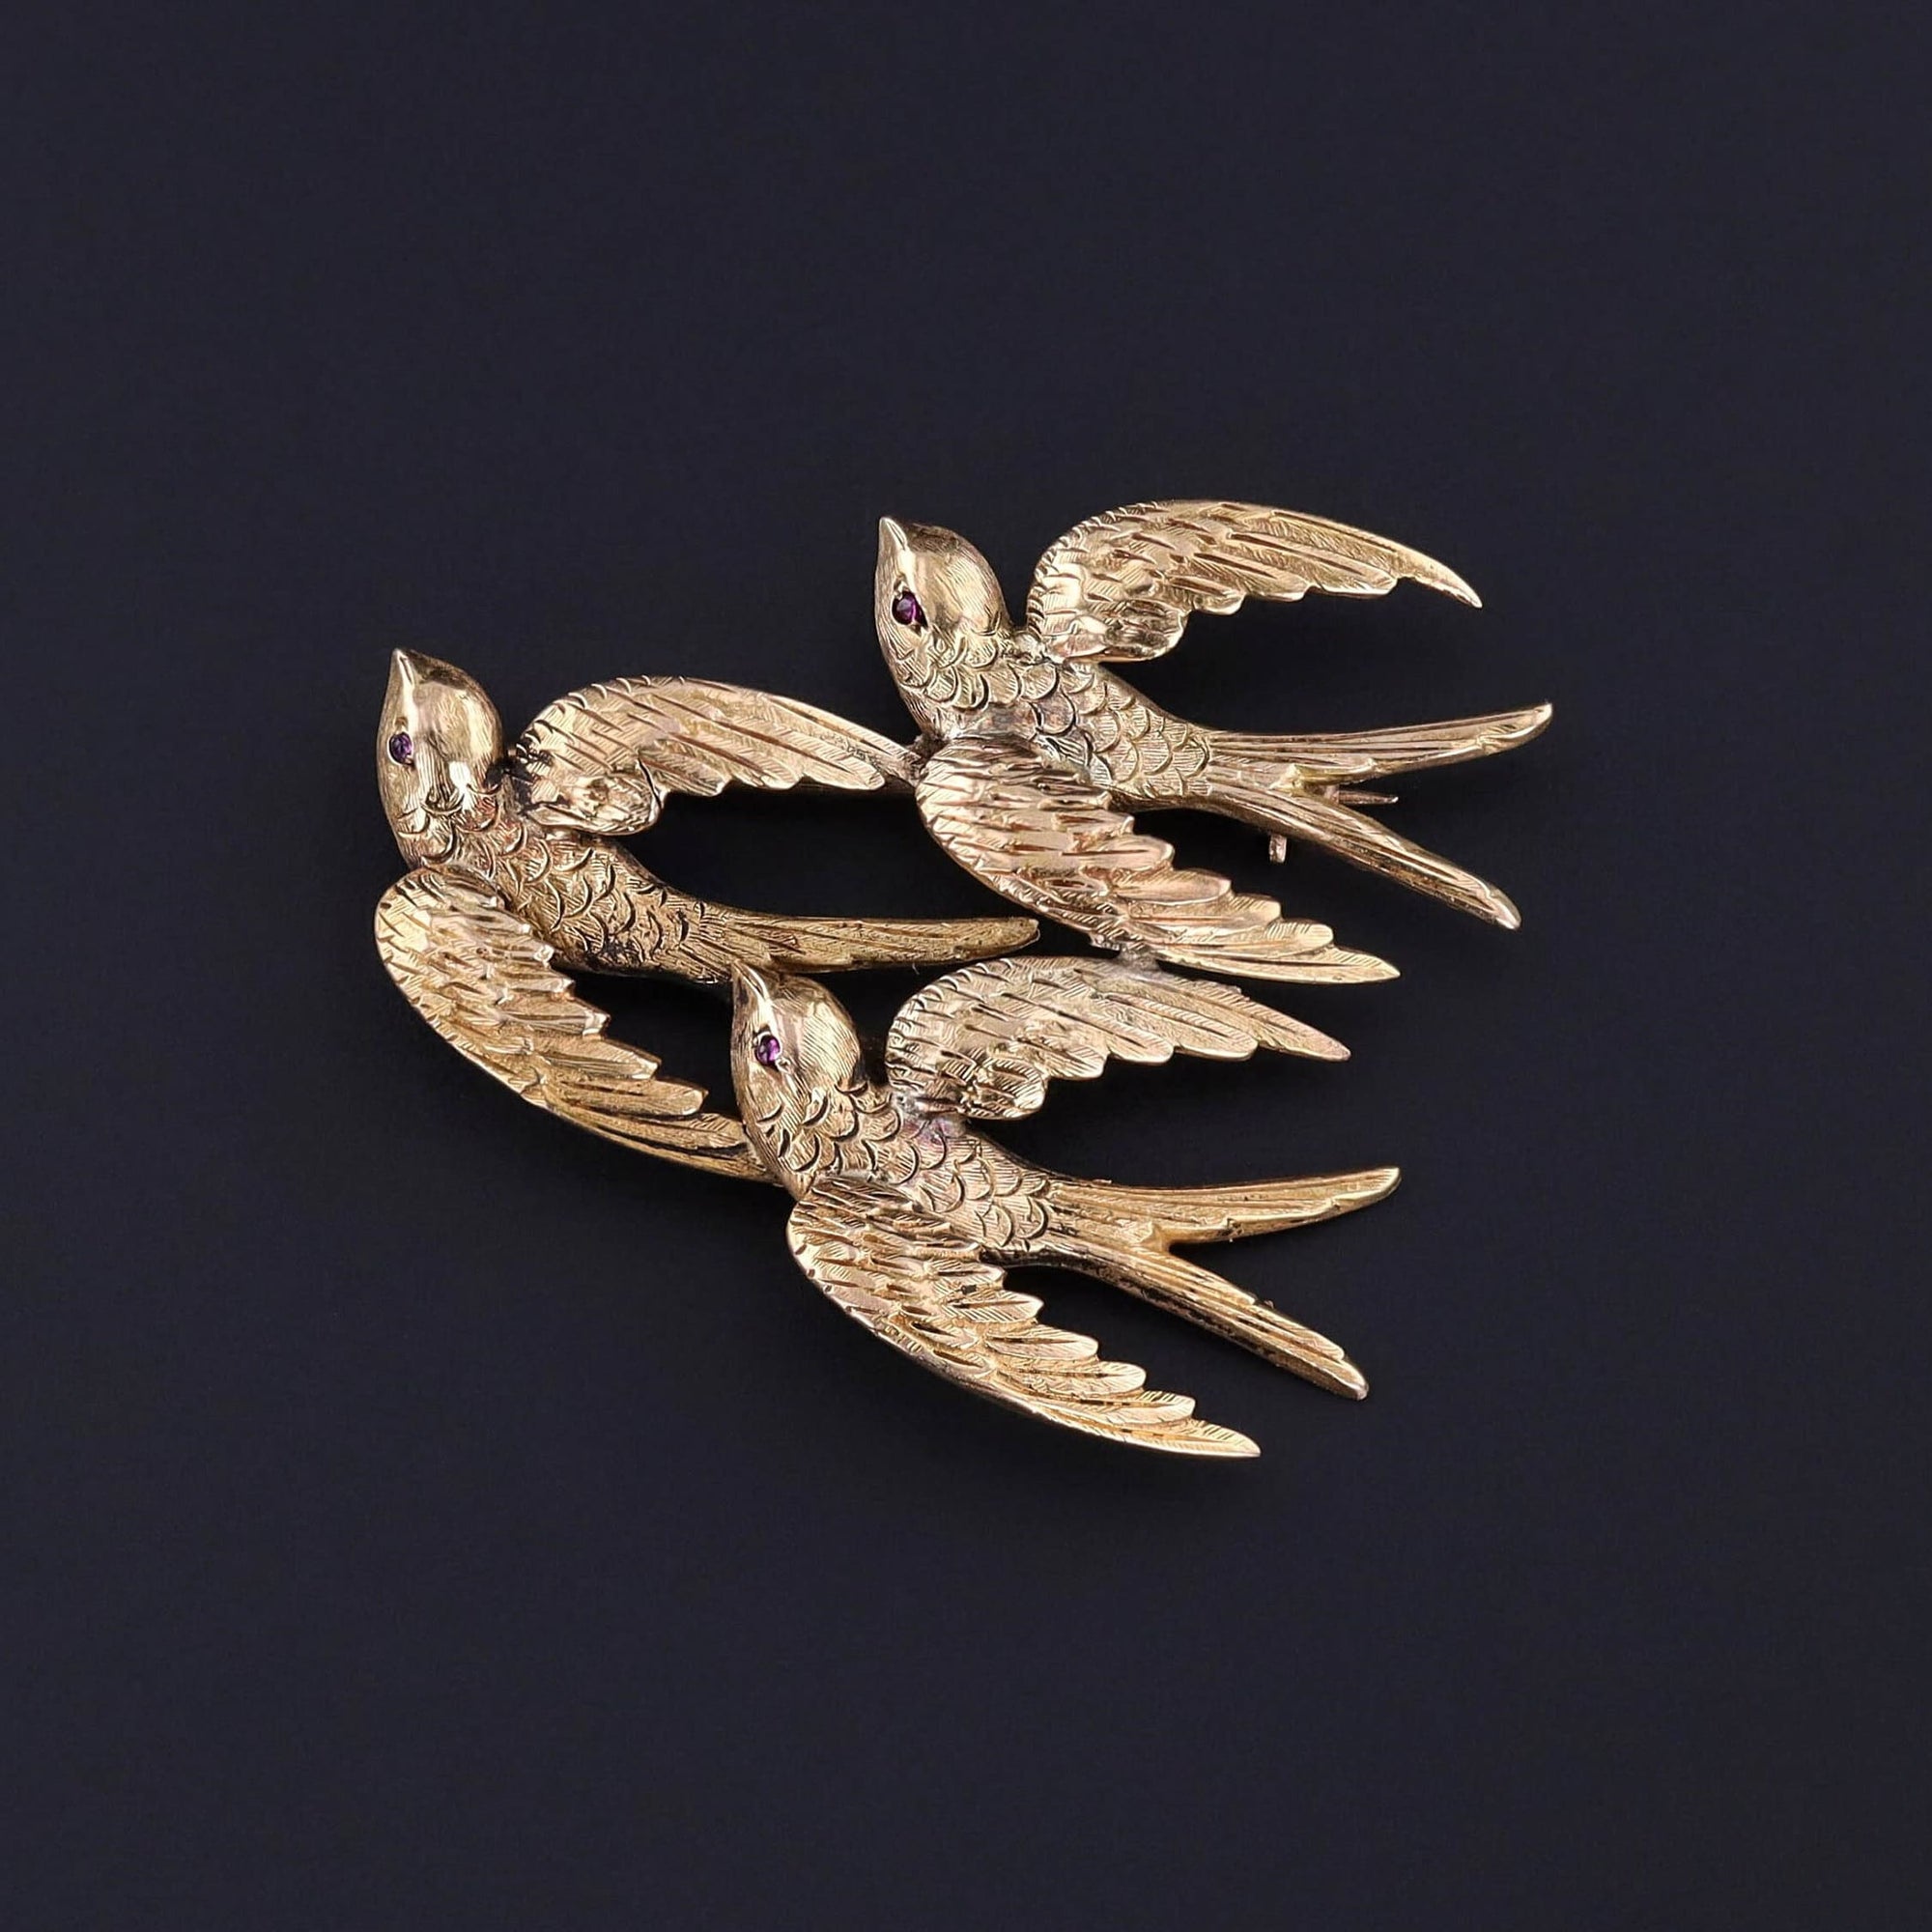 A late Victorian era 14k gold swallow brooch. Swallows are a symbol of homecoming and make wonderful bridal gifts. Each swallow has a tiny ruby eye.